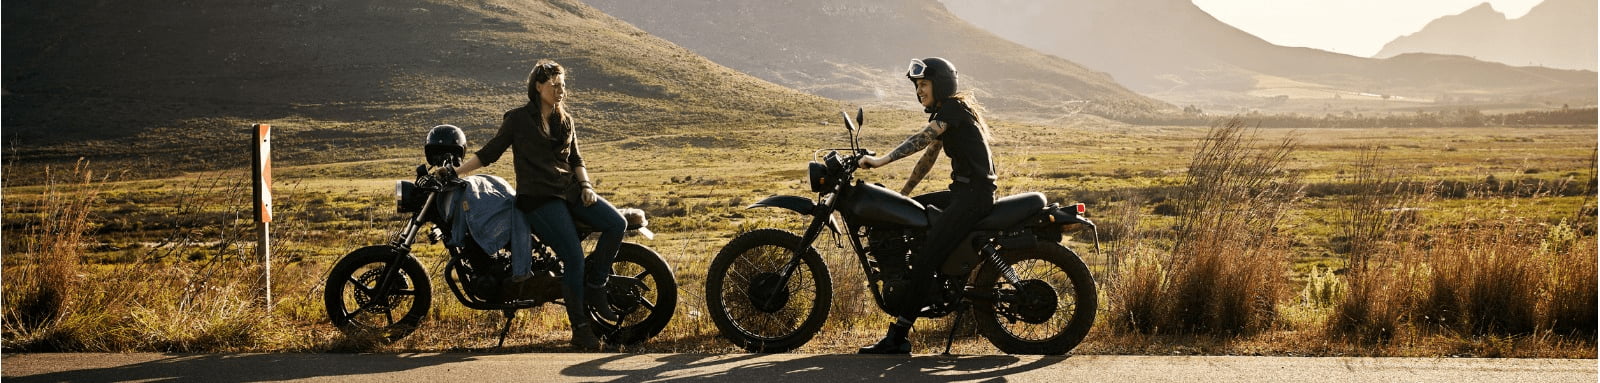 Female motorcyclists on road trip